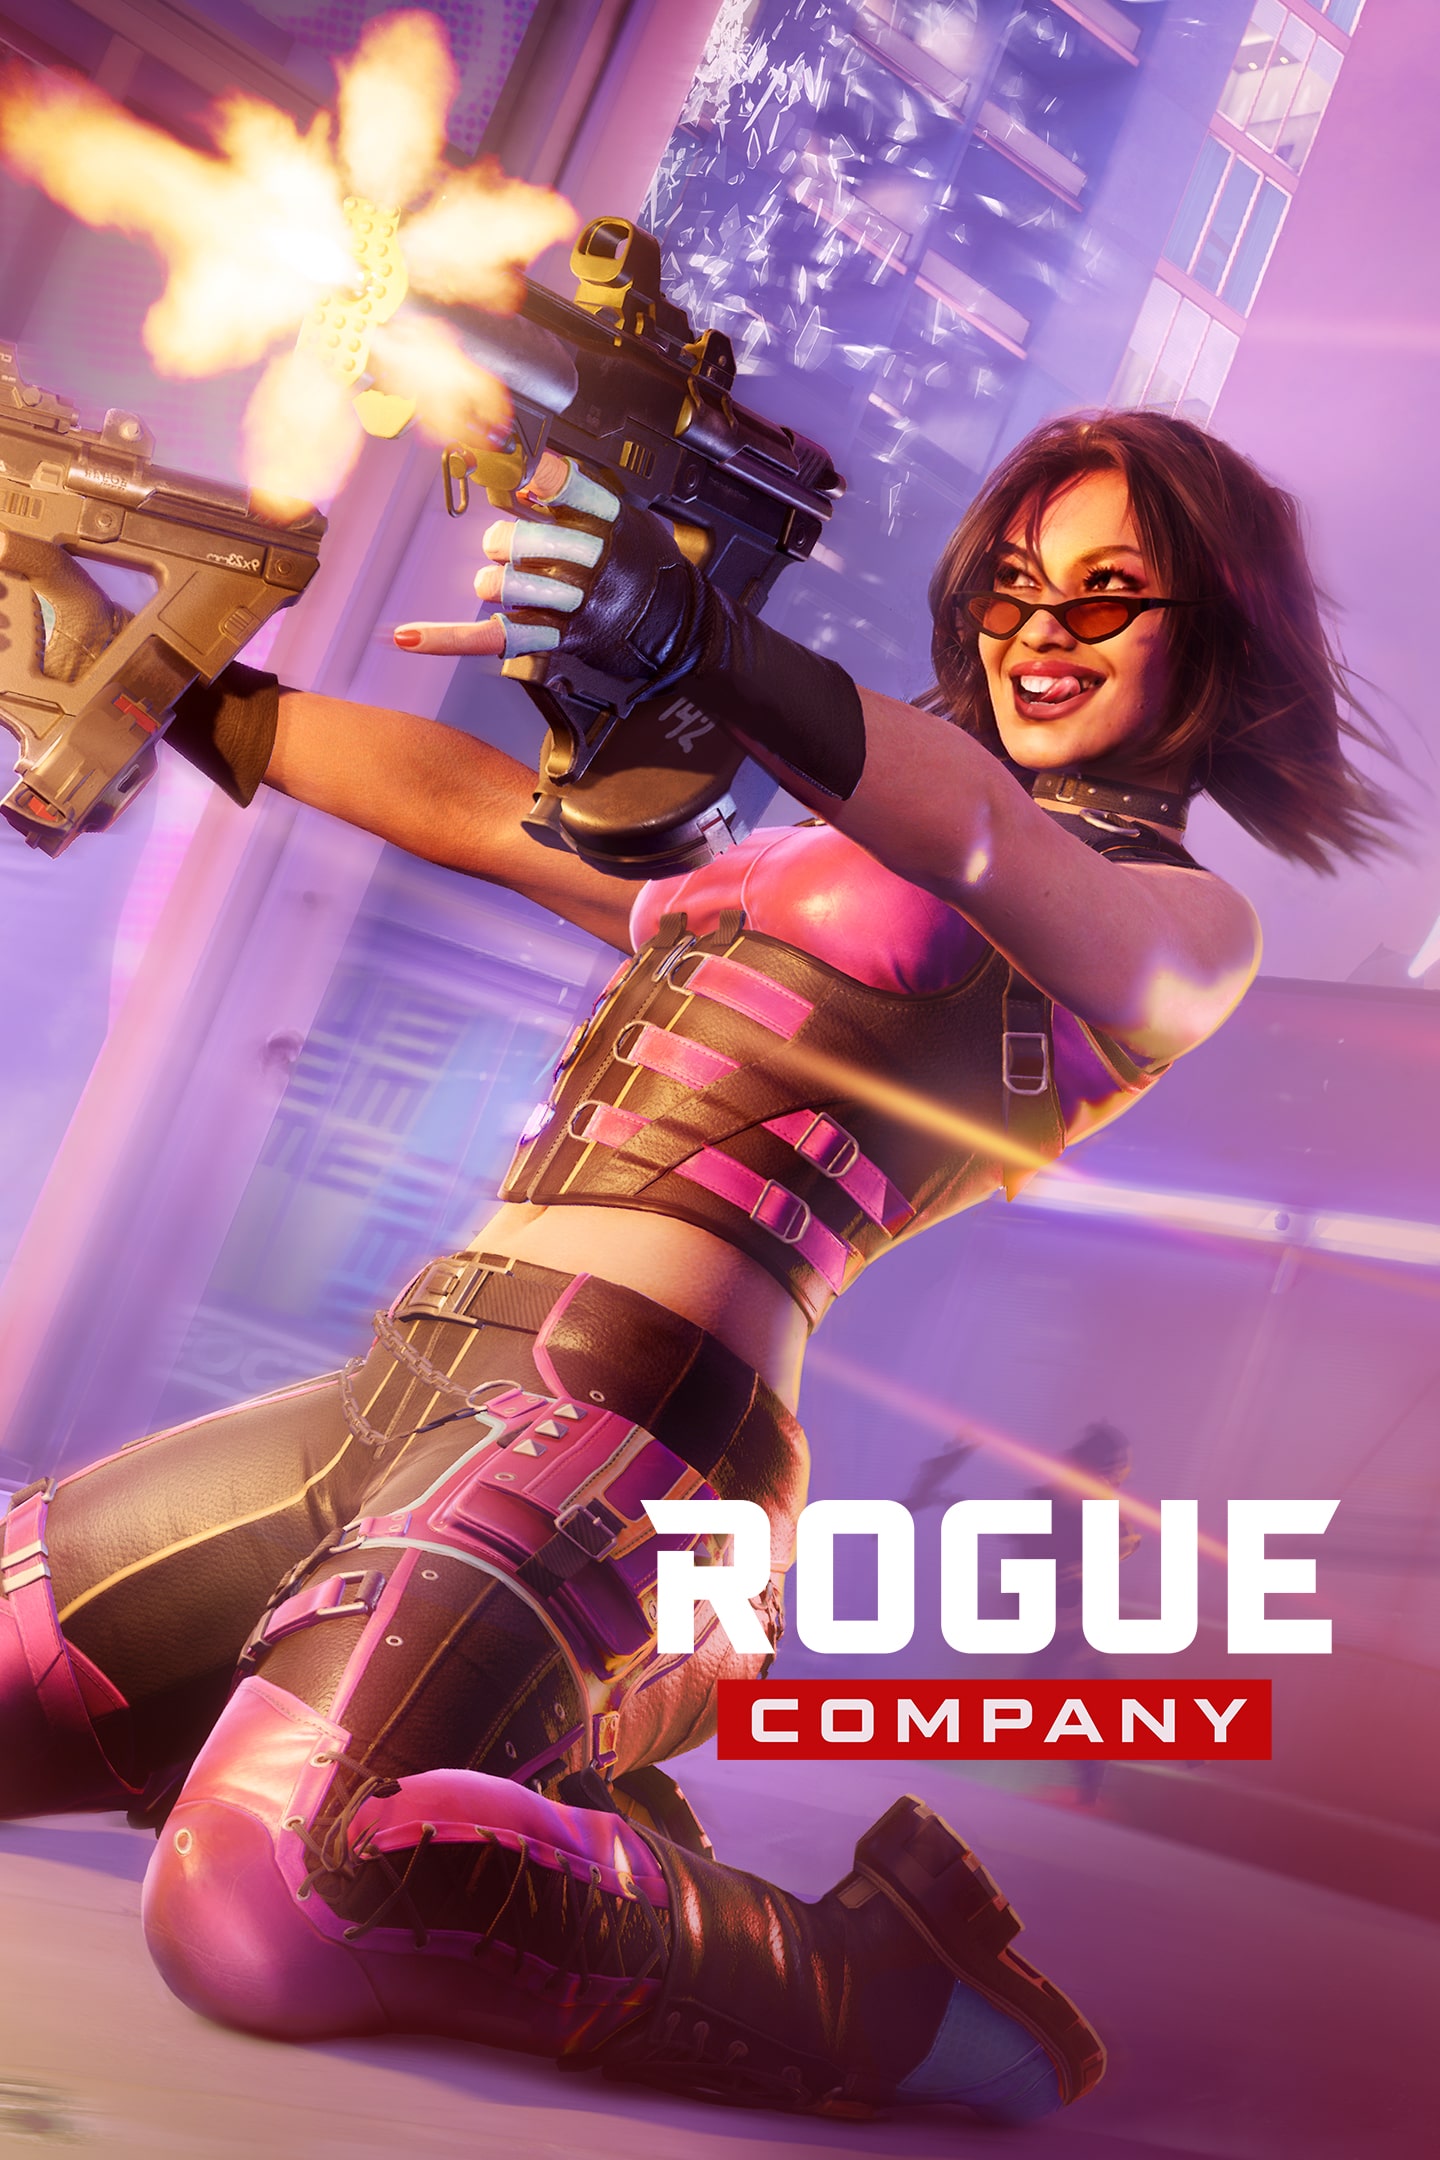 Rogue Company: ViVi Starter Pack (Simplified Chinese, English, Japanese)